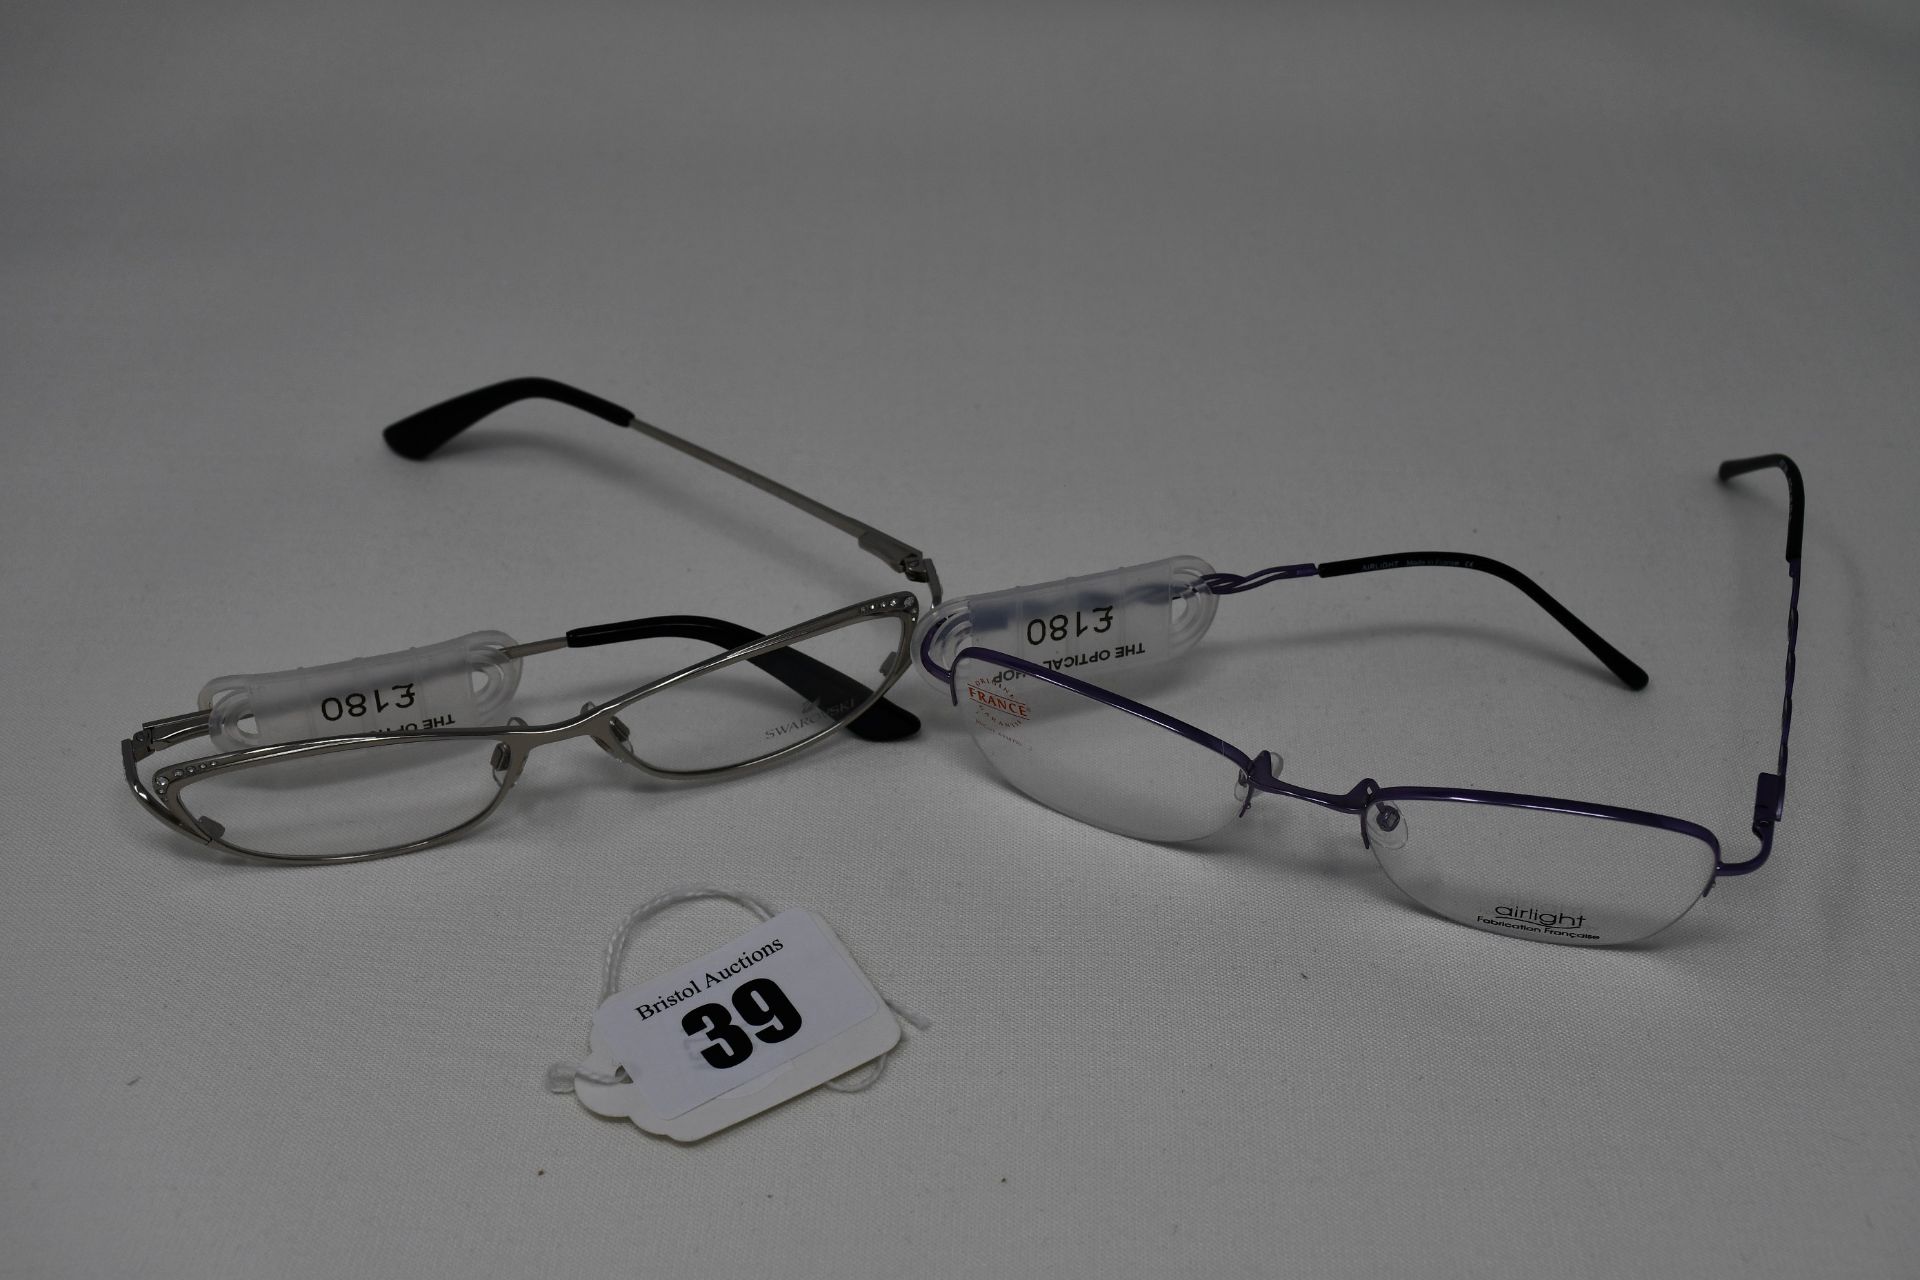 Two pairs of as new glasses frames with clear glass; Airlight and Swarovski (RRP £180 each).